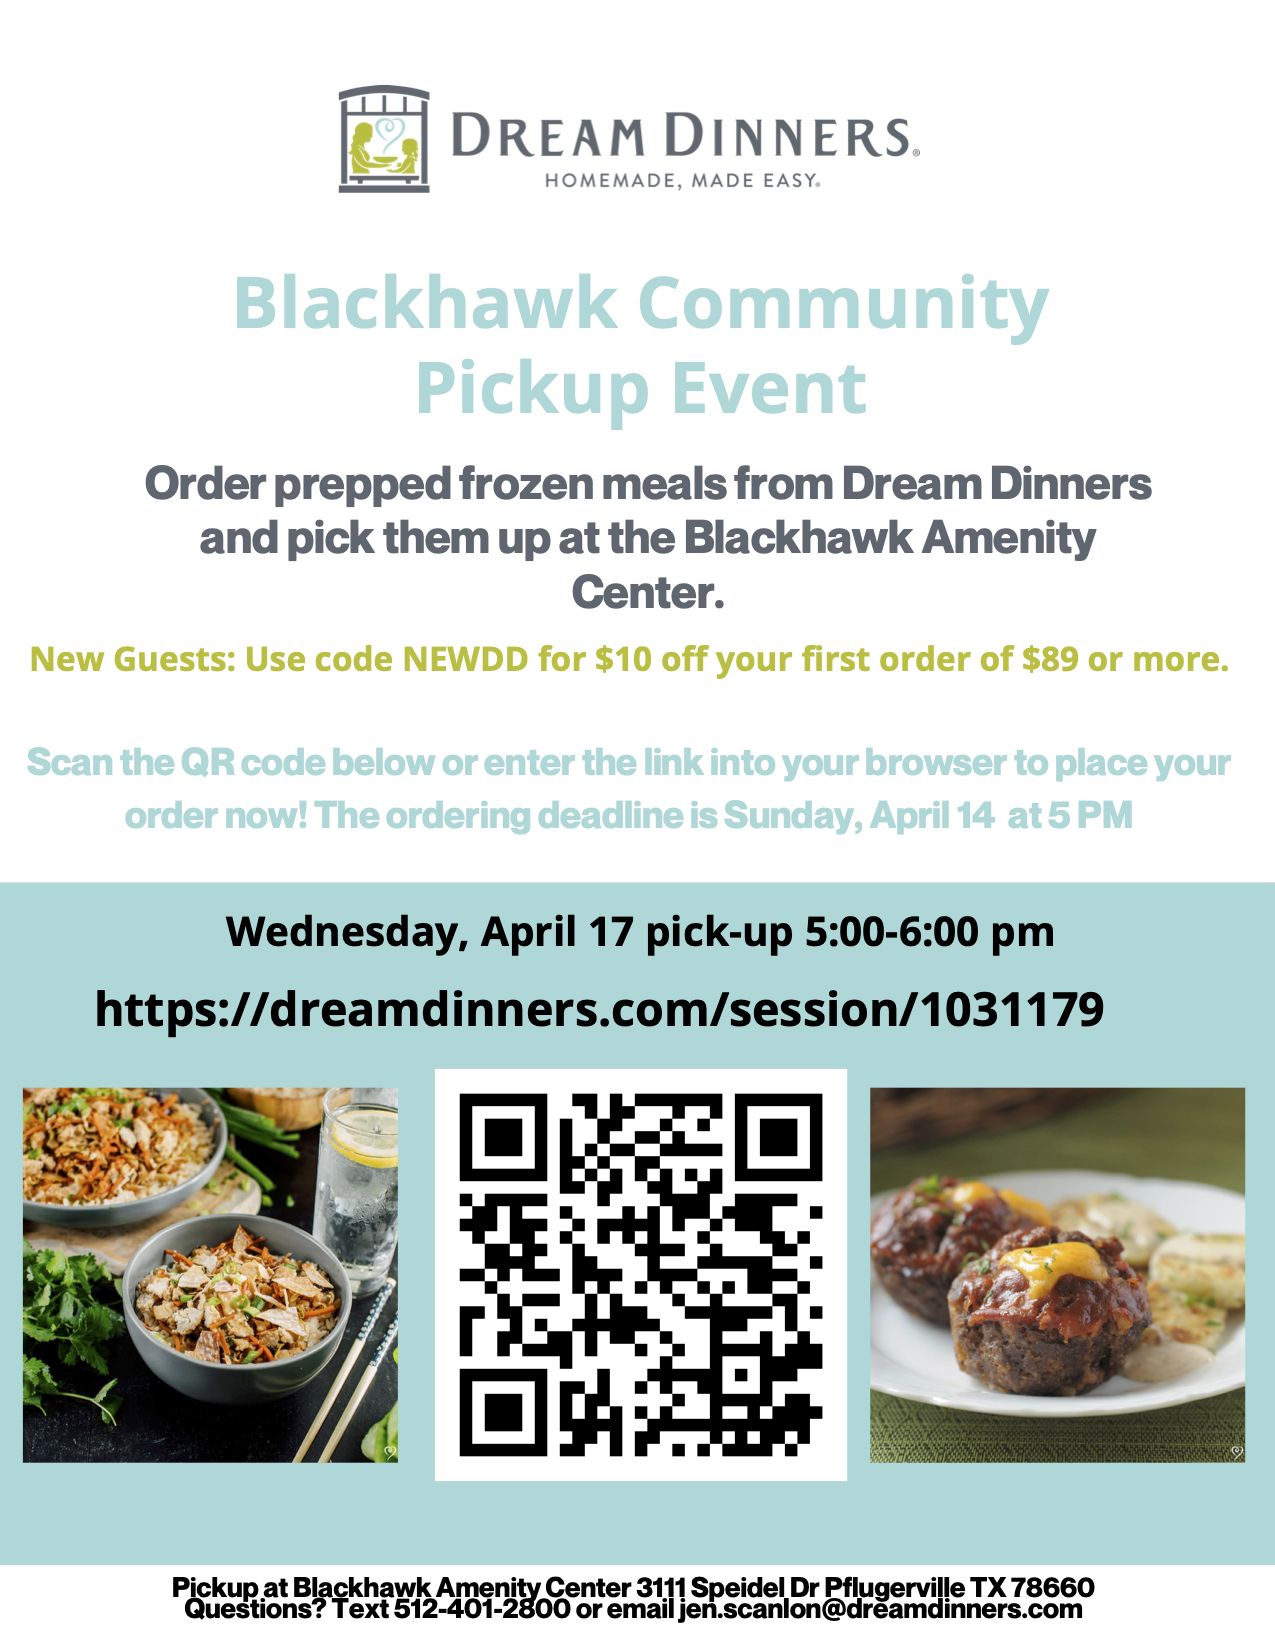 Flyer for the Blackhawk Community Pickup Event hosted by Dream Dinners. The top of the flyer features the Dream Dinners logo with the tagline 'Homemade, made easy.' Below, large text announces the pickup event and details follow, including an offer to order prepped frozen meals for pickup at the Blackhawk Amenity Center, a promotional code for new guests, and a QR code for ordering. The ordering deadline is stated as Sunday, April 14, at 5 PM, with the pickup date on Wednesday, April 17, from 5:00 to 6:00 pm. The flyer provides a link to Dream Dinners' website, images of the offered meals, and contact information for inquiries, including a phone number and email address. The pickup location address in Pflugerville, Texas, is provided at the bottom.